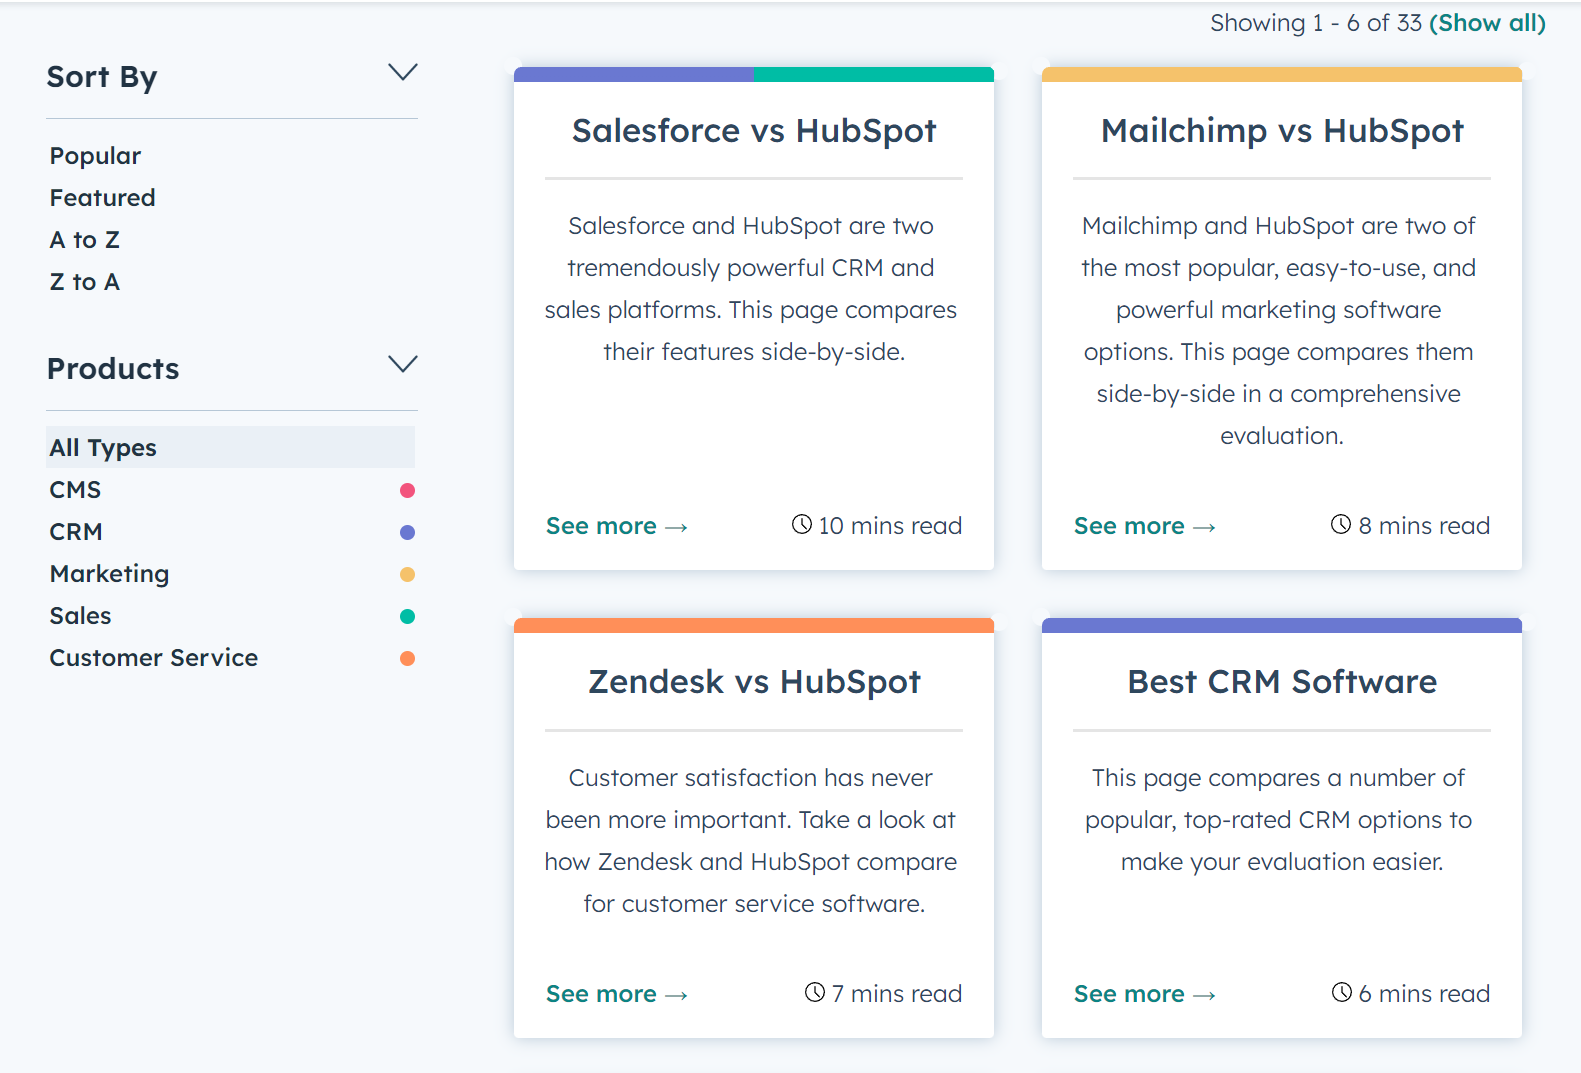 HubSpot has a specific subfolder to house its multiple comparison pages